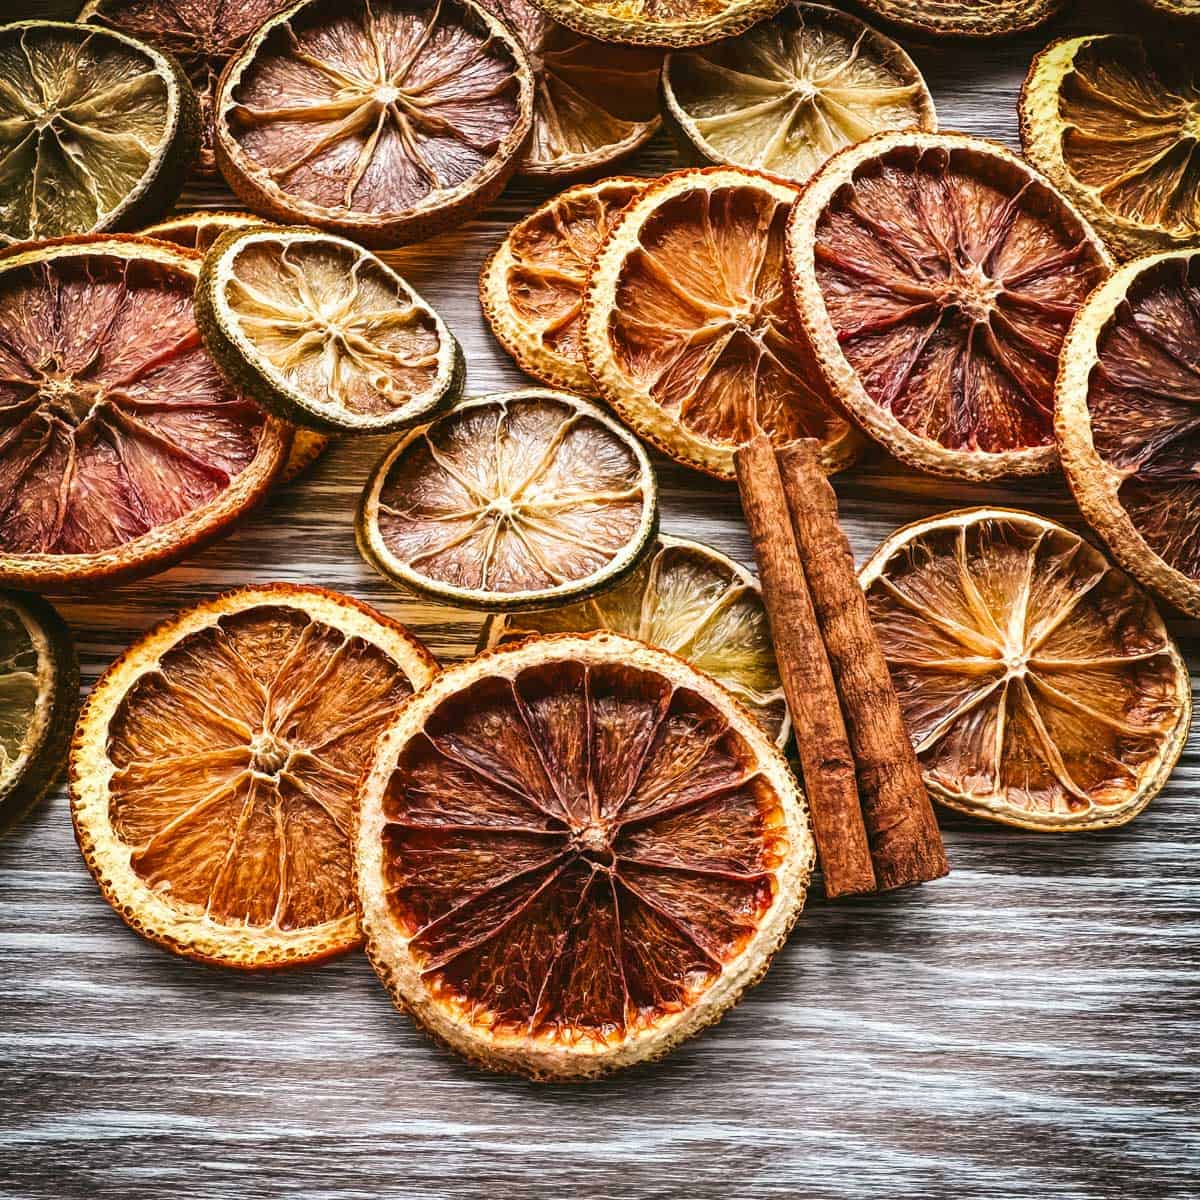 Dried slices of various citrus lying on a gray wood surface, with cinnamon sticks on top. 